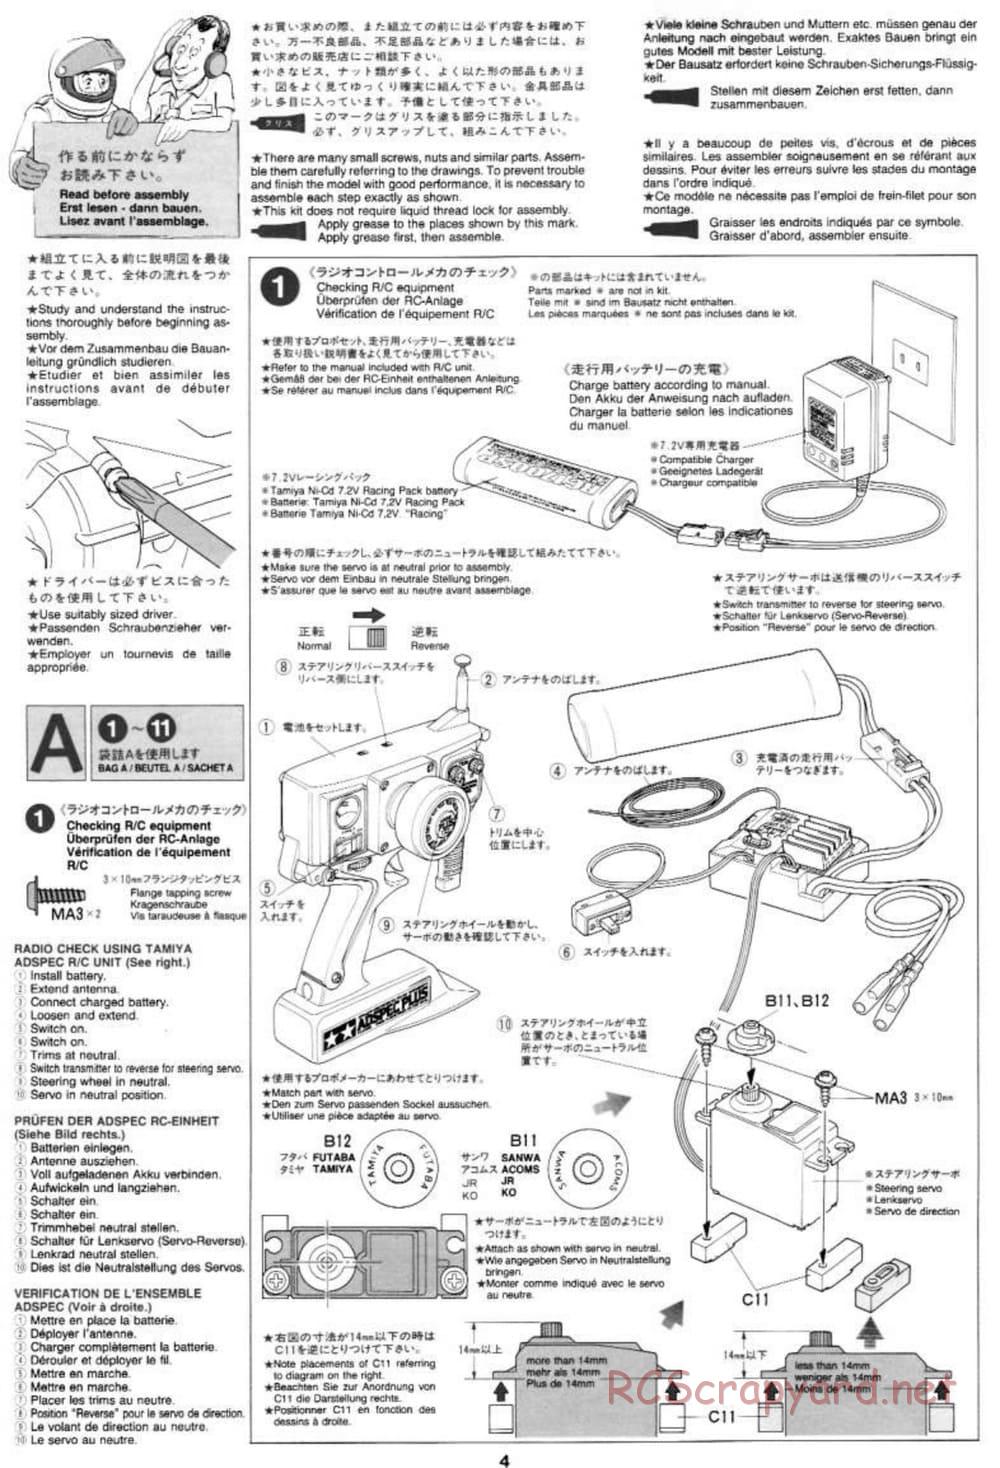 Tamiya - Toyota Celica GT-Four 97 Monte Carlo - TL-01 Chassis - Manual - Page 4